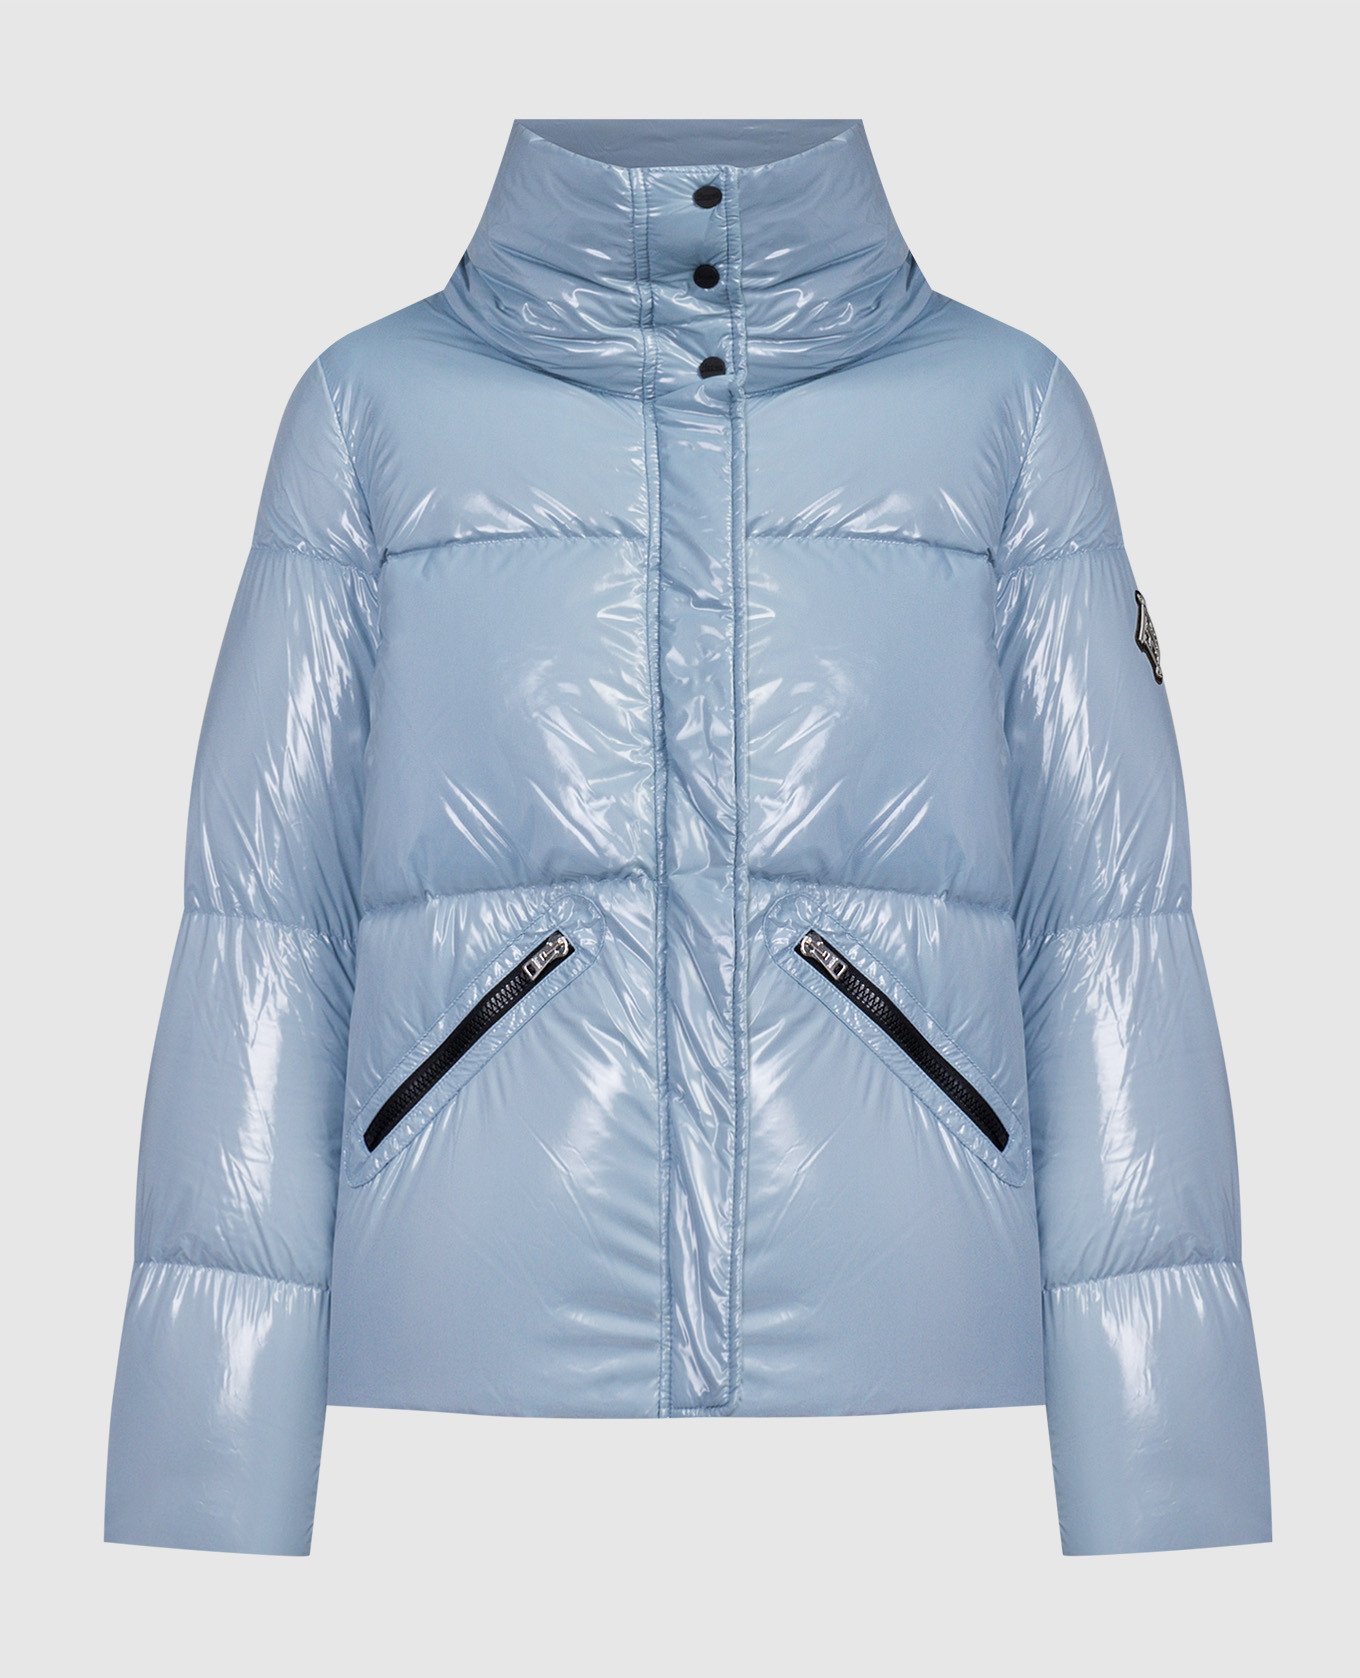 Blue down jacket with a shiny effect